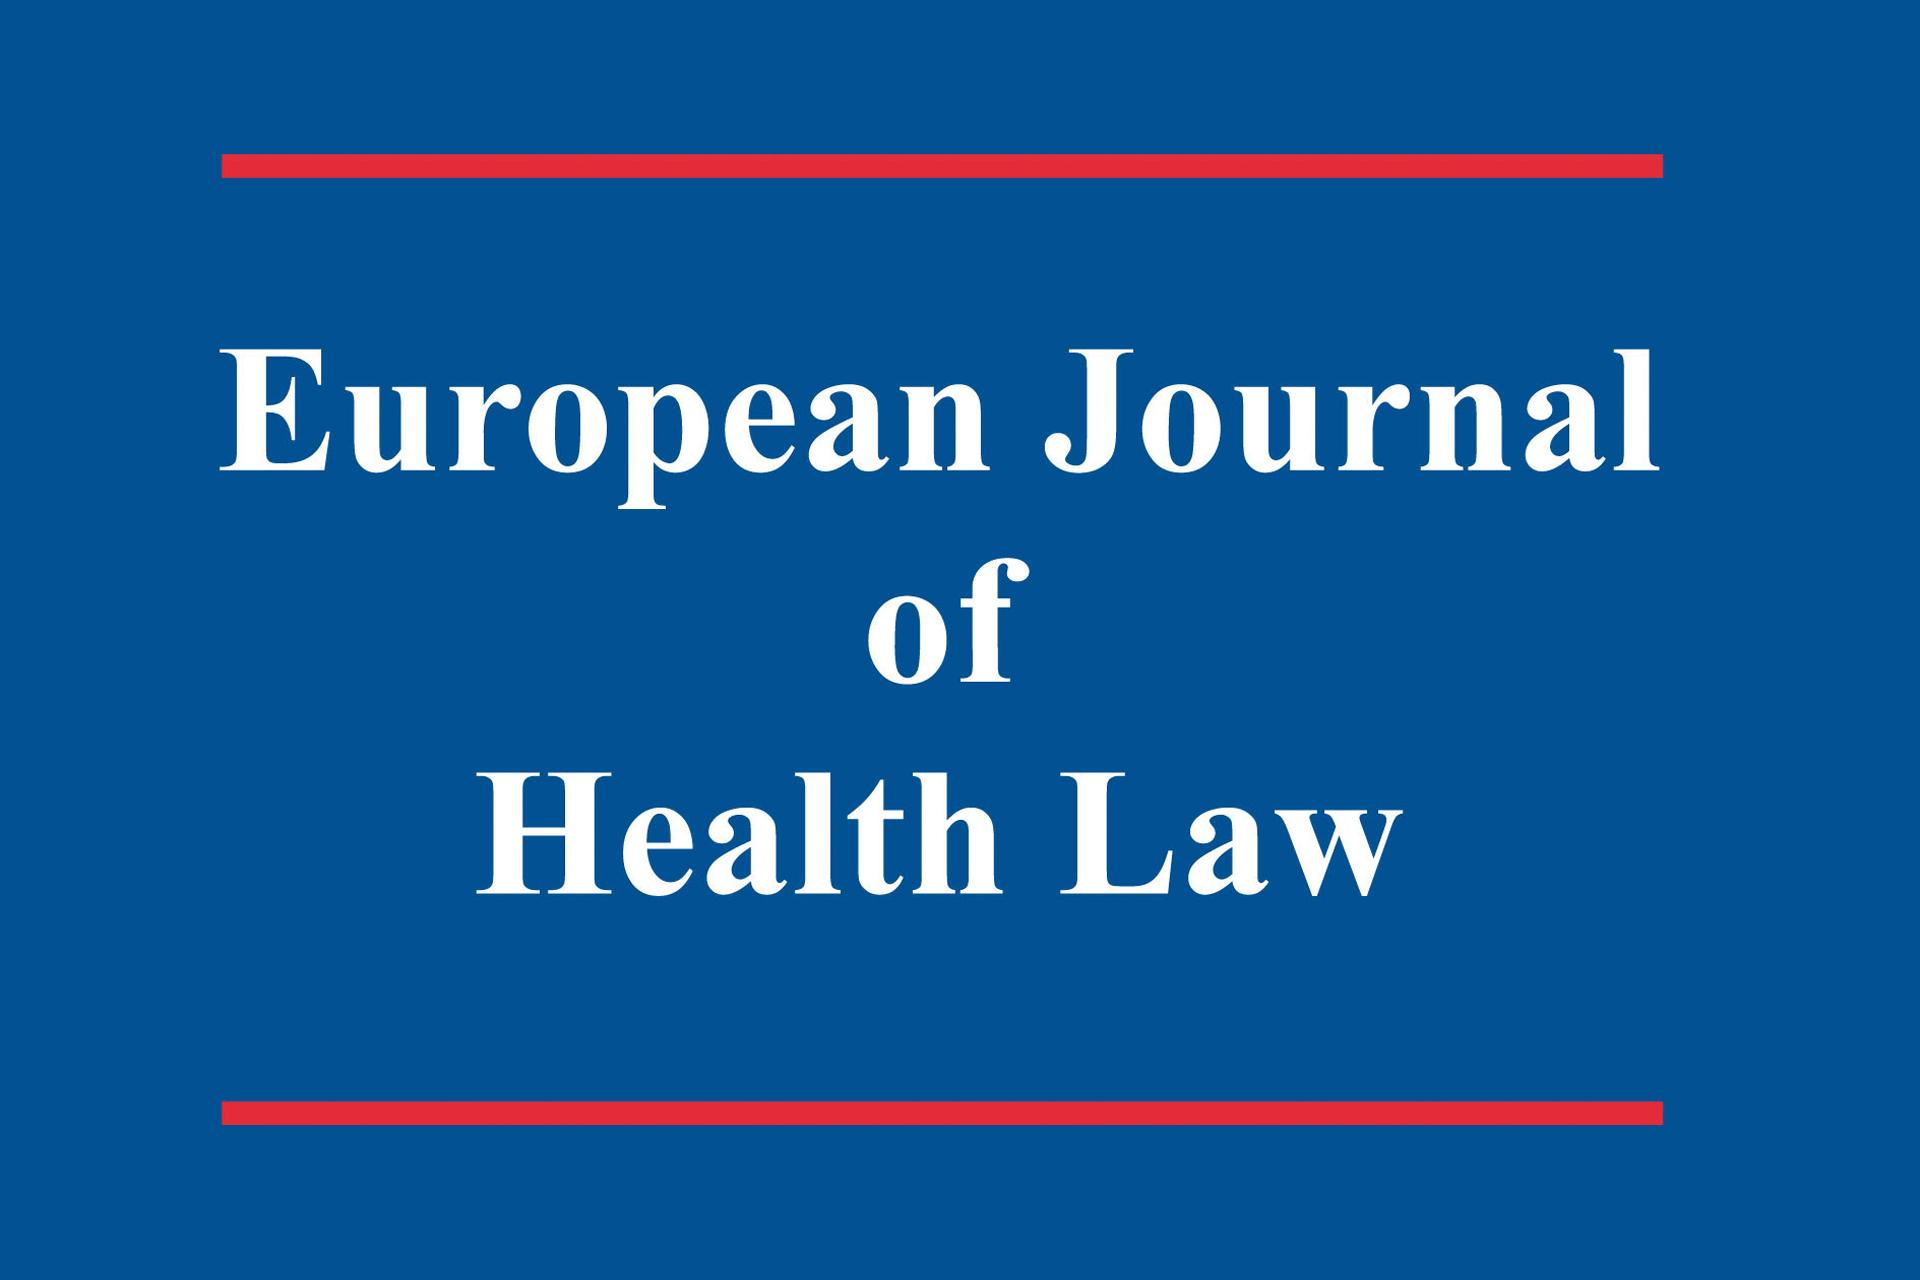 Dr Edward Dove appointed to the Editorial Board of the European Journal of Health Law